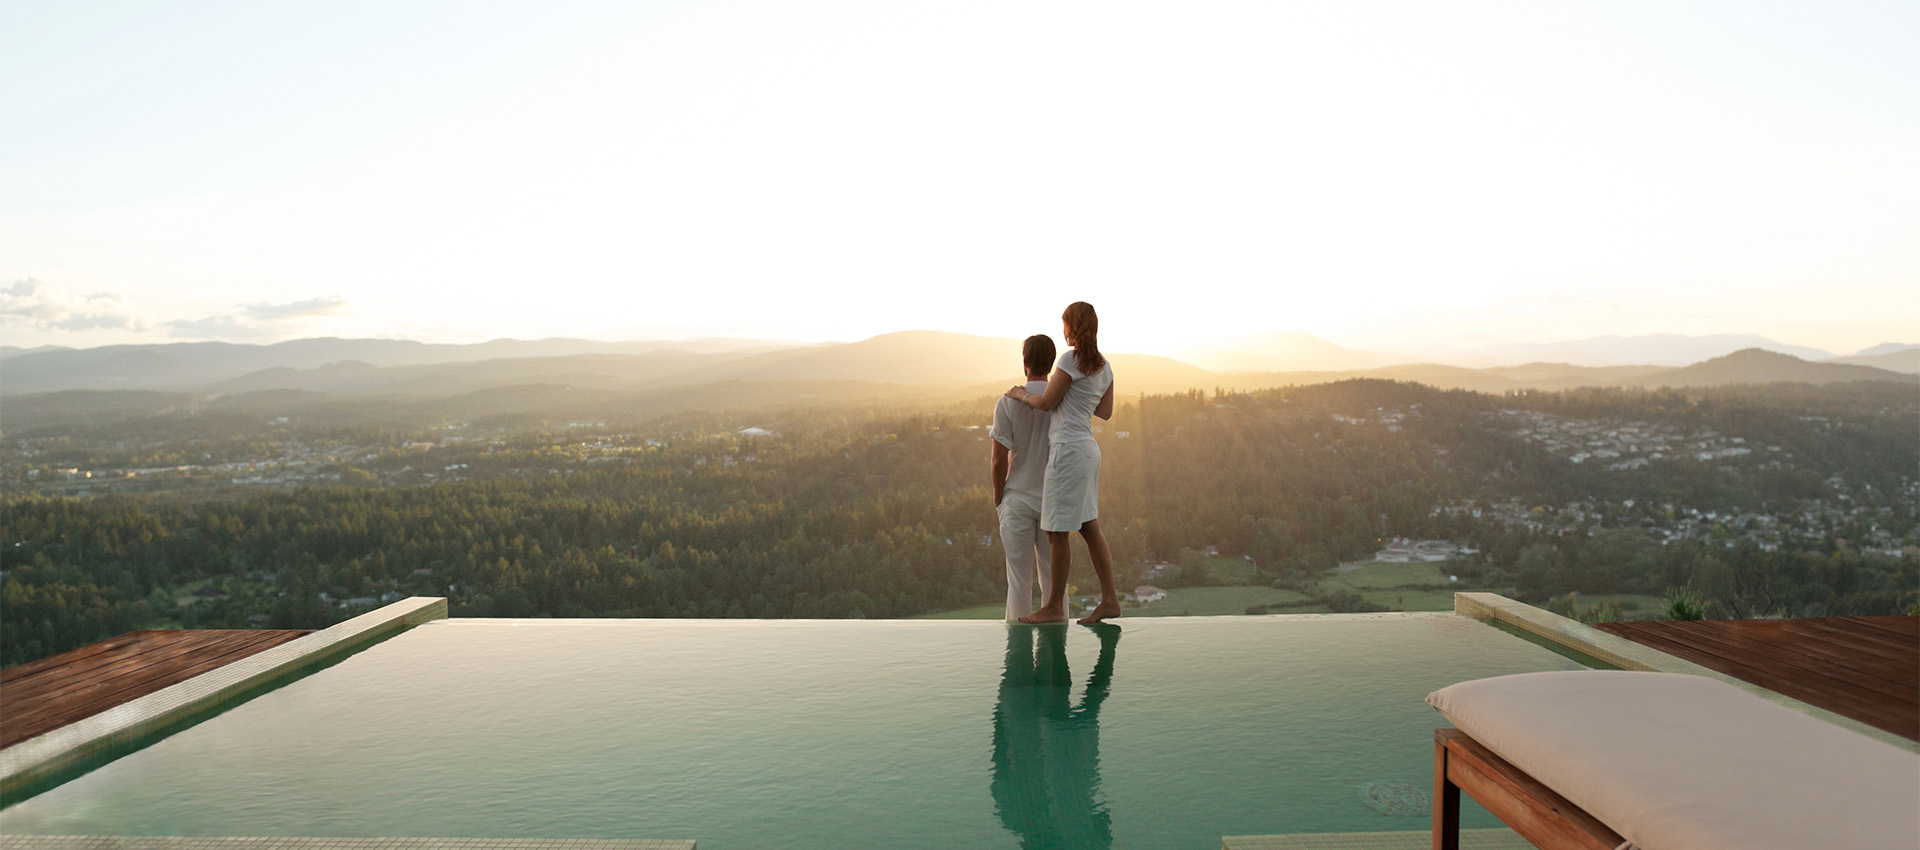 A couple standing on the edge of a pool looking out into the distance image